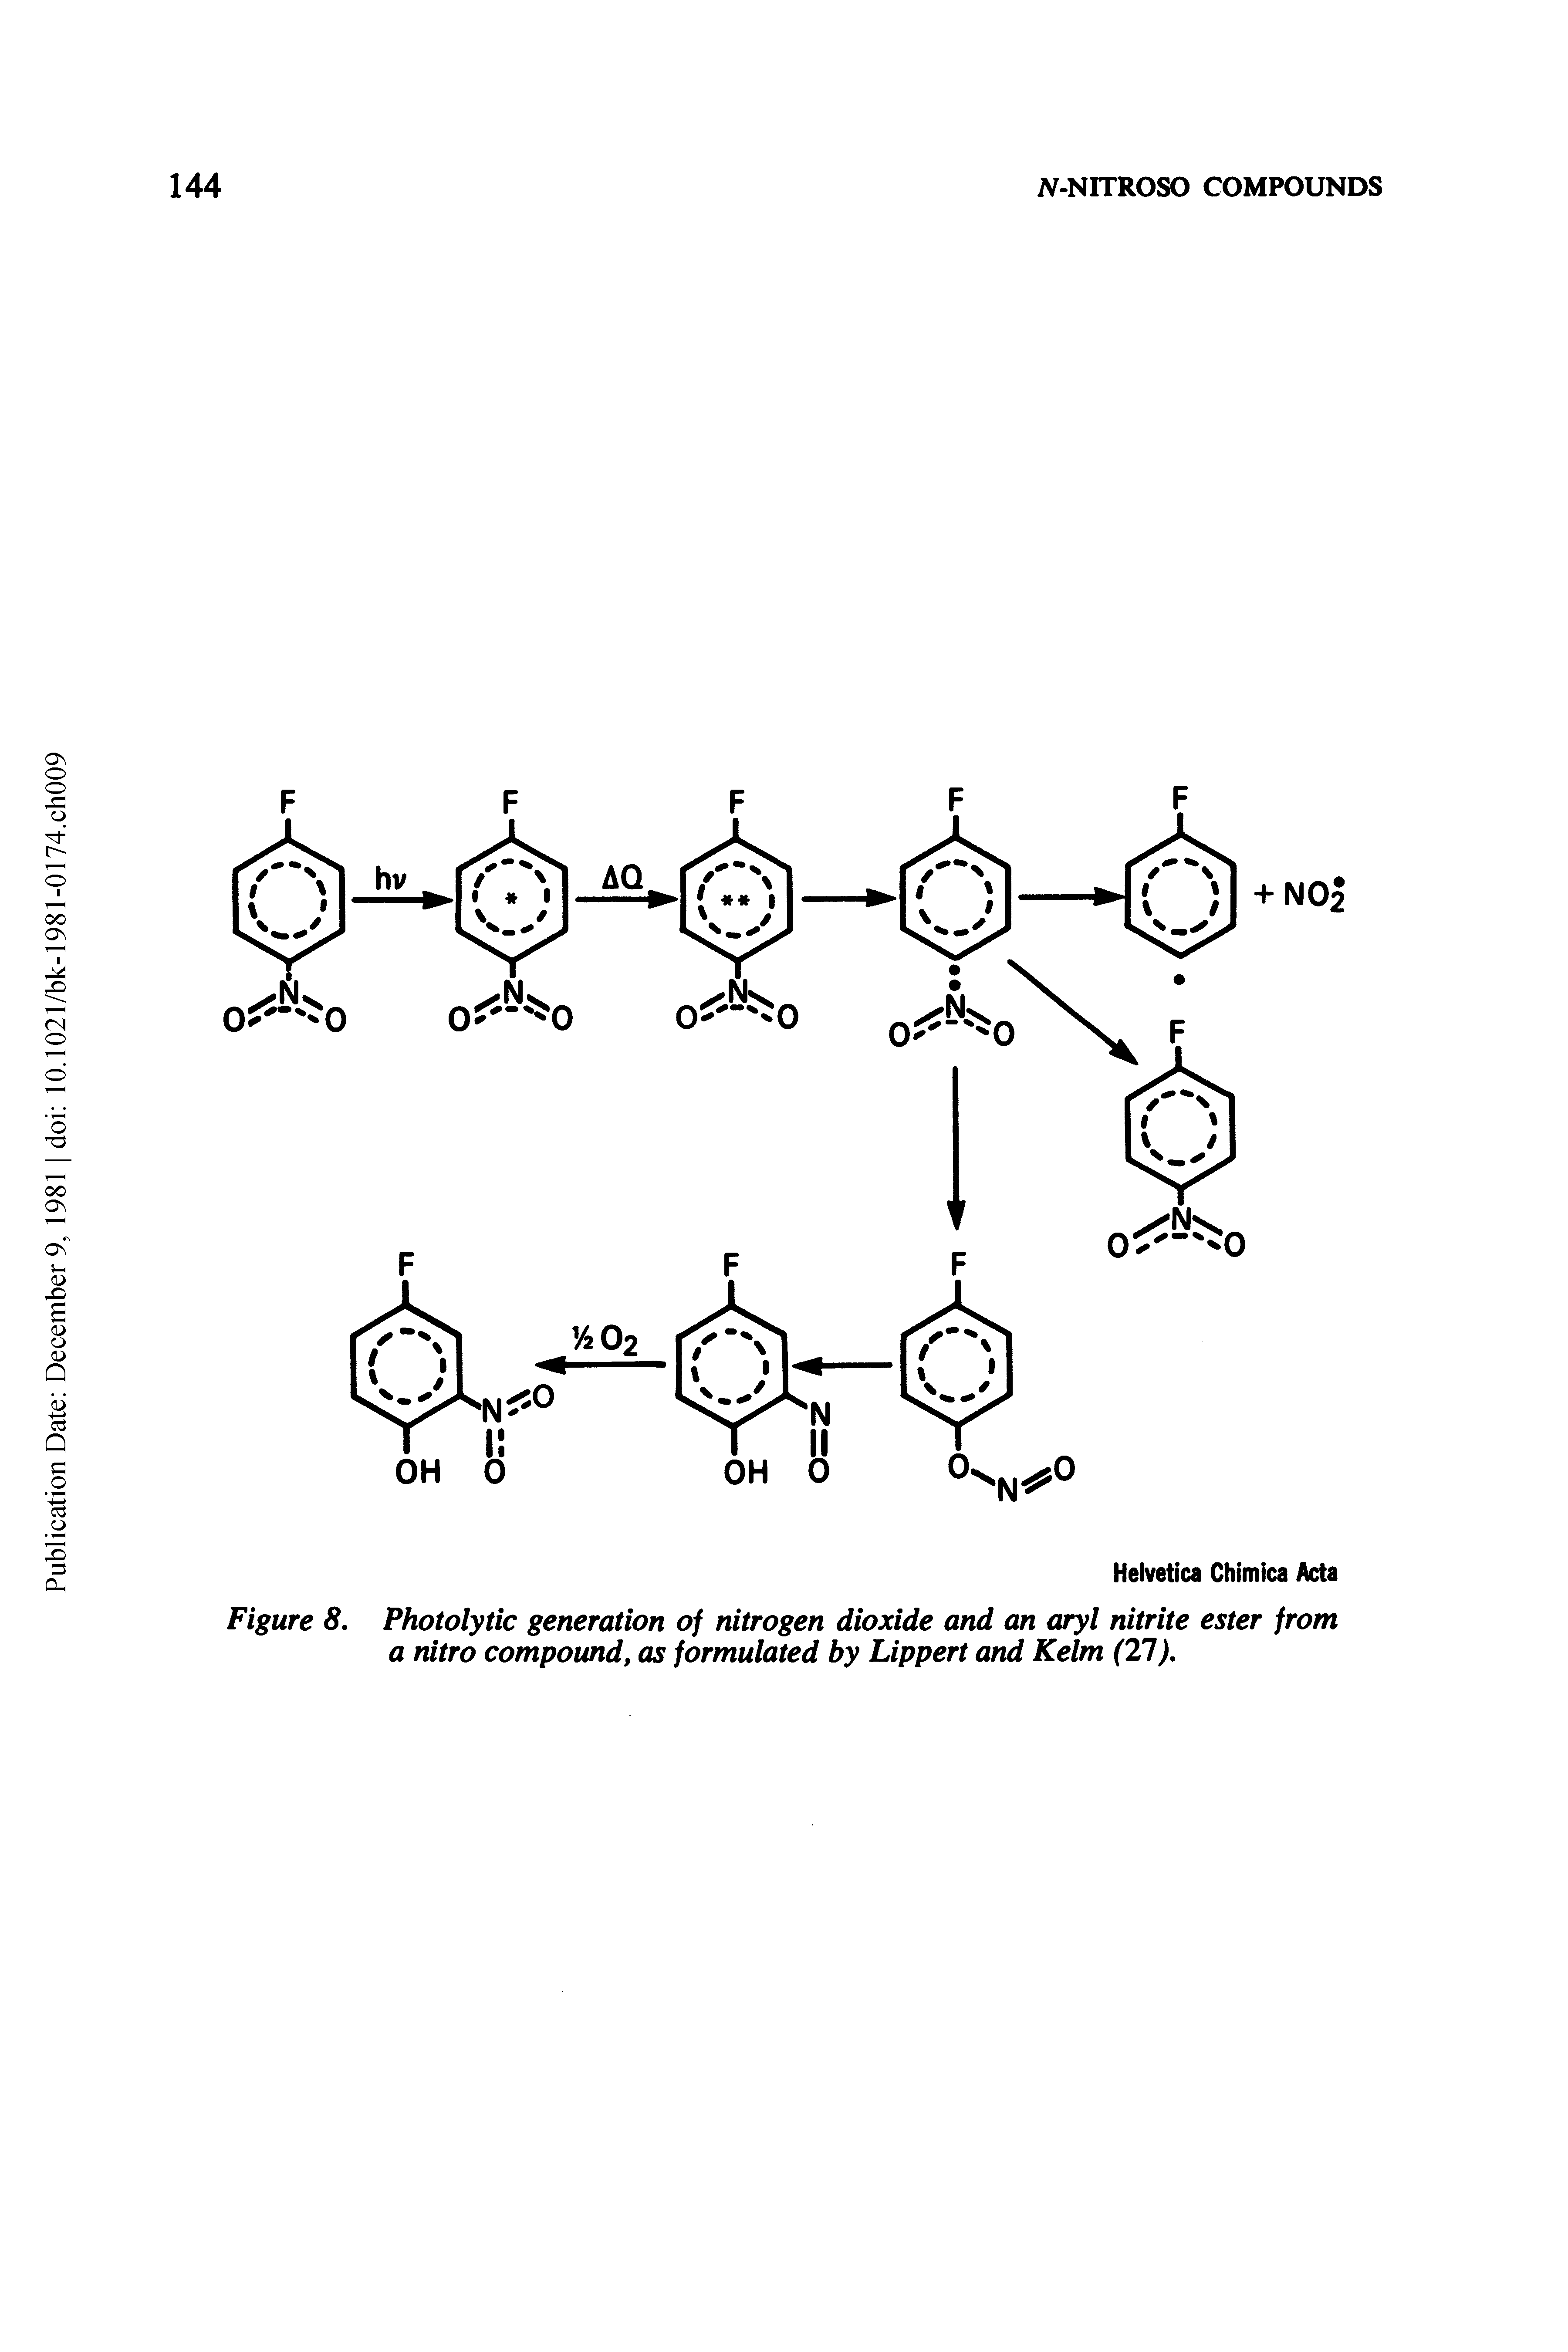 Figure 8, Photolytic generation of nitrogen dioxide and an aryl nitrite ester from a nitro compound, as formulated by Lippert and Kelm (27),...